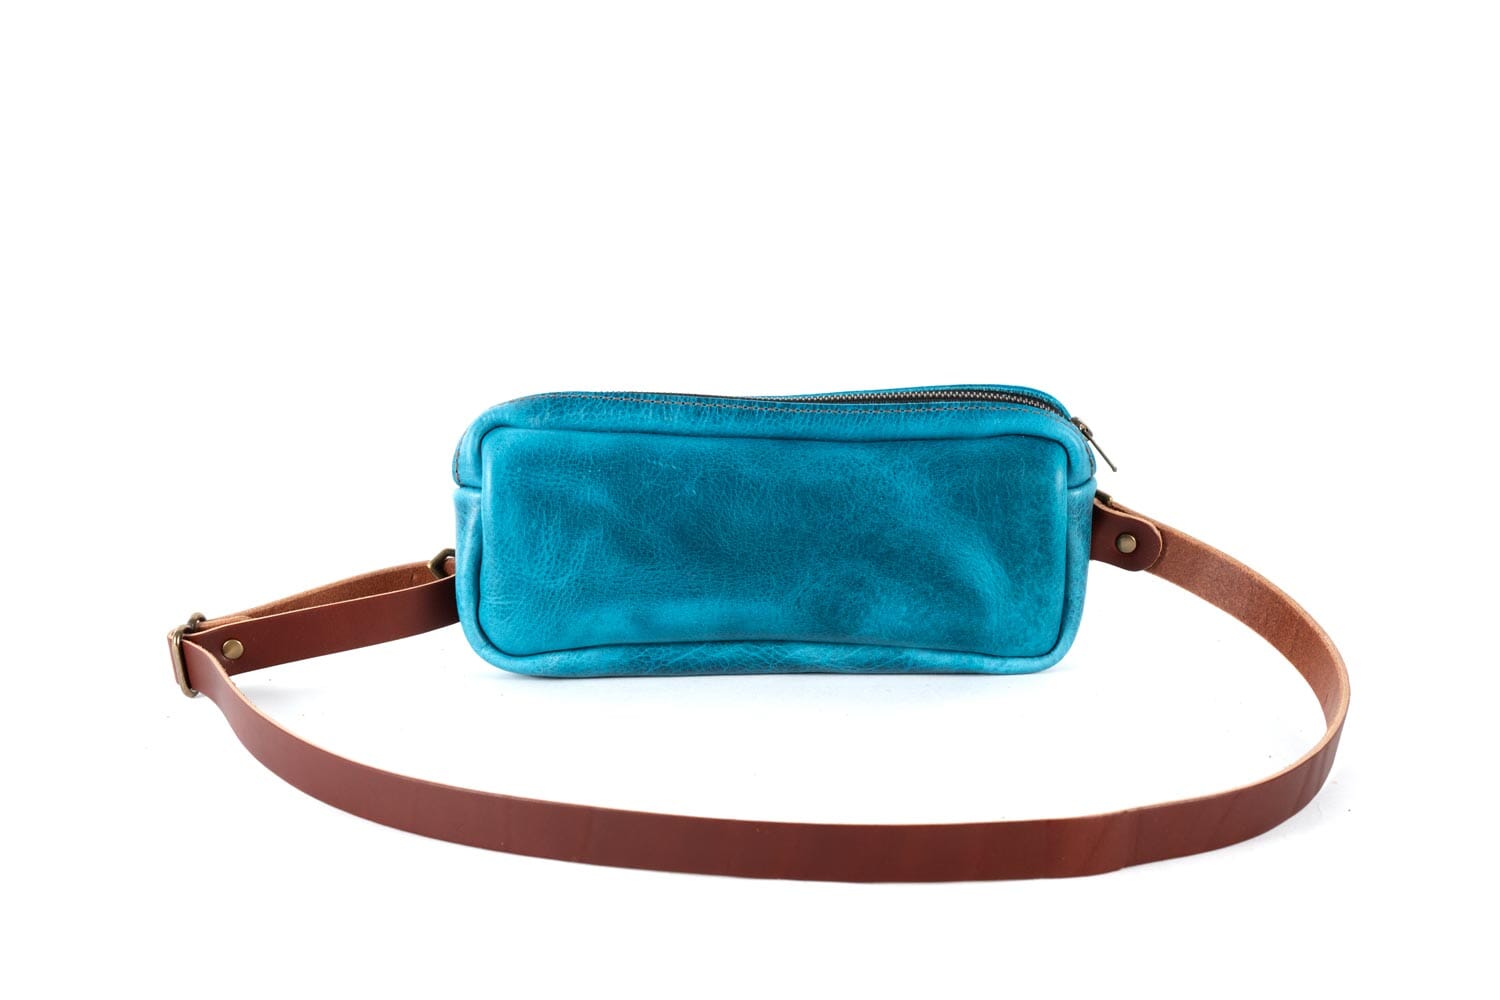 LEATHER FANNY PACK / LEATHER WAIST BAG - COBALT BISON - TOP ZIPPER (RTS)